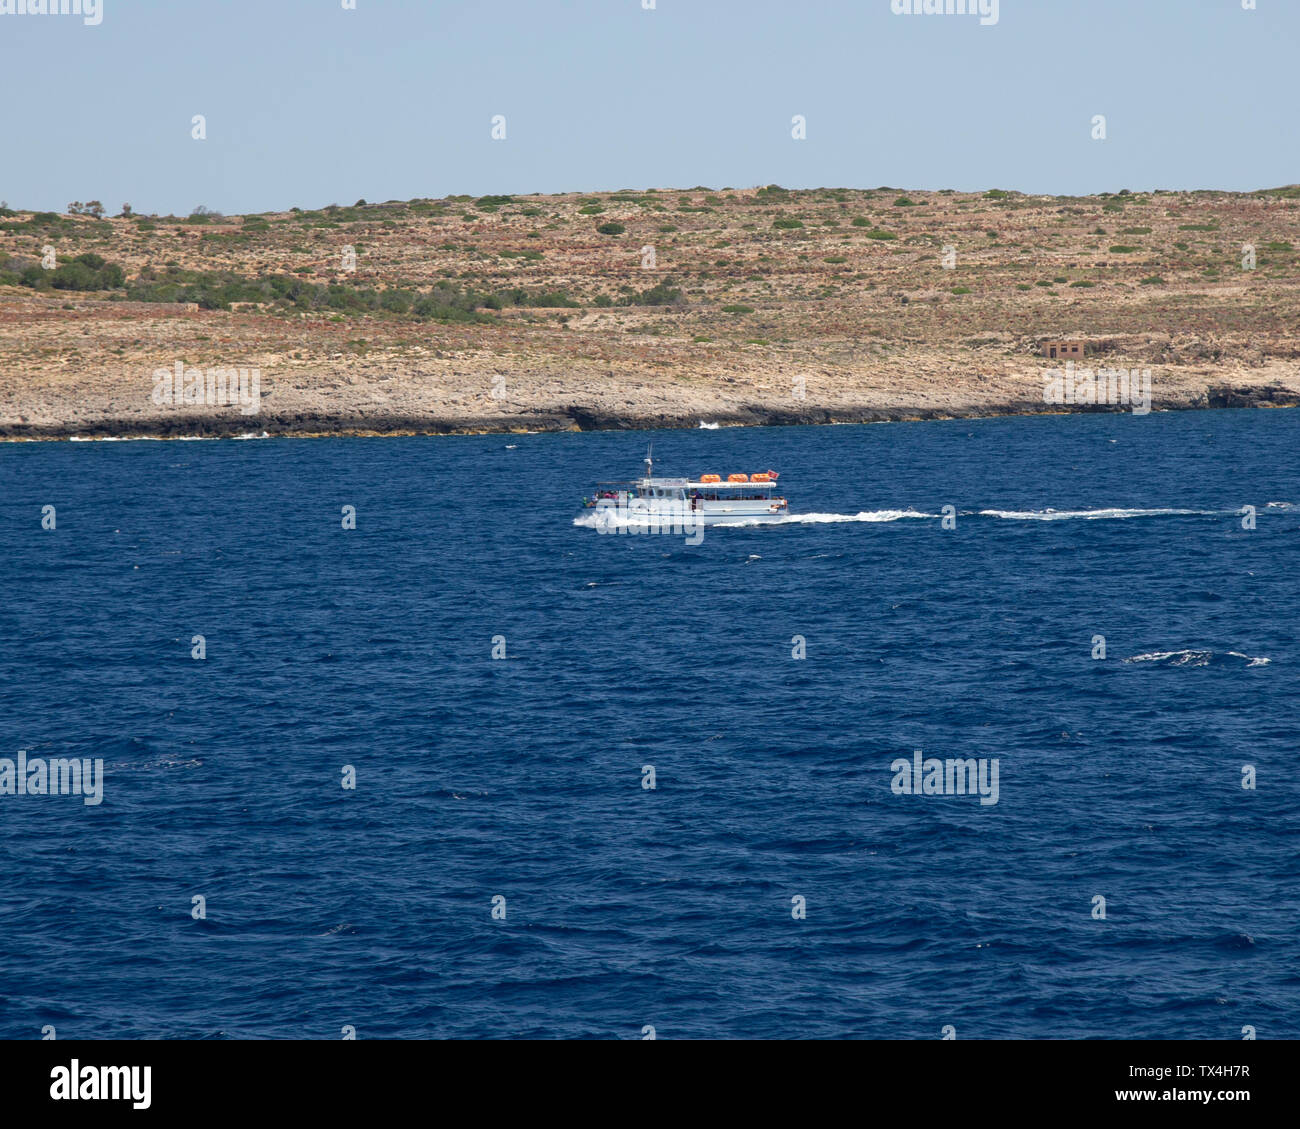 One of the ferries connecting Comino, Gozo, and Malta Stock Photo